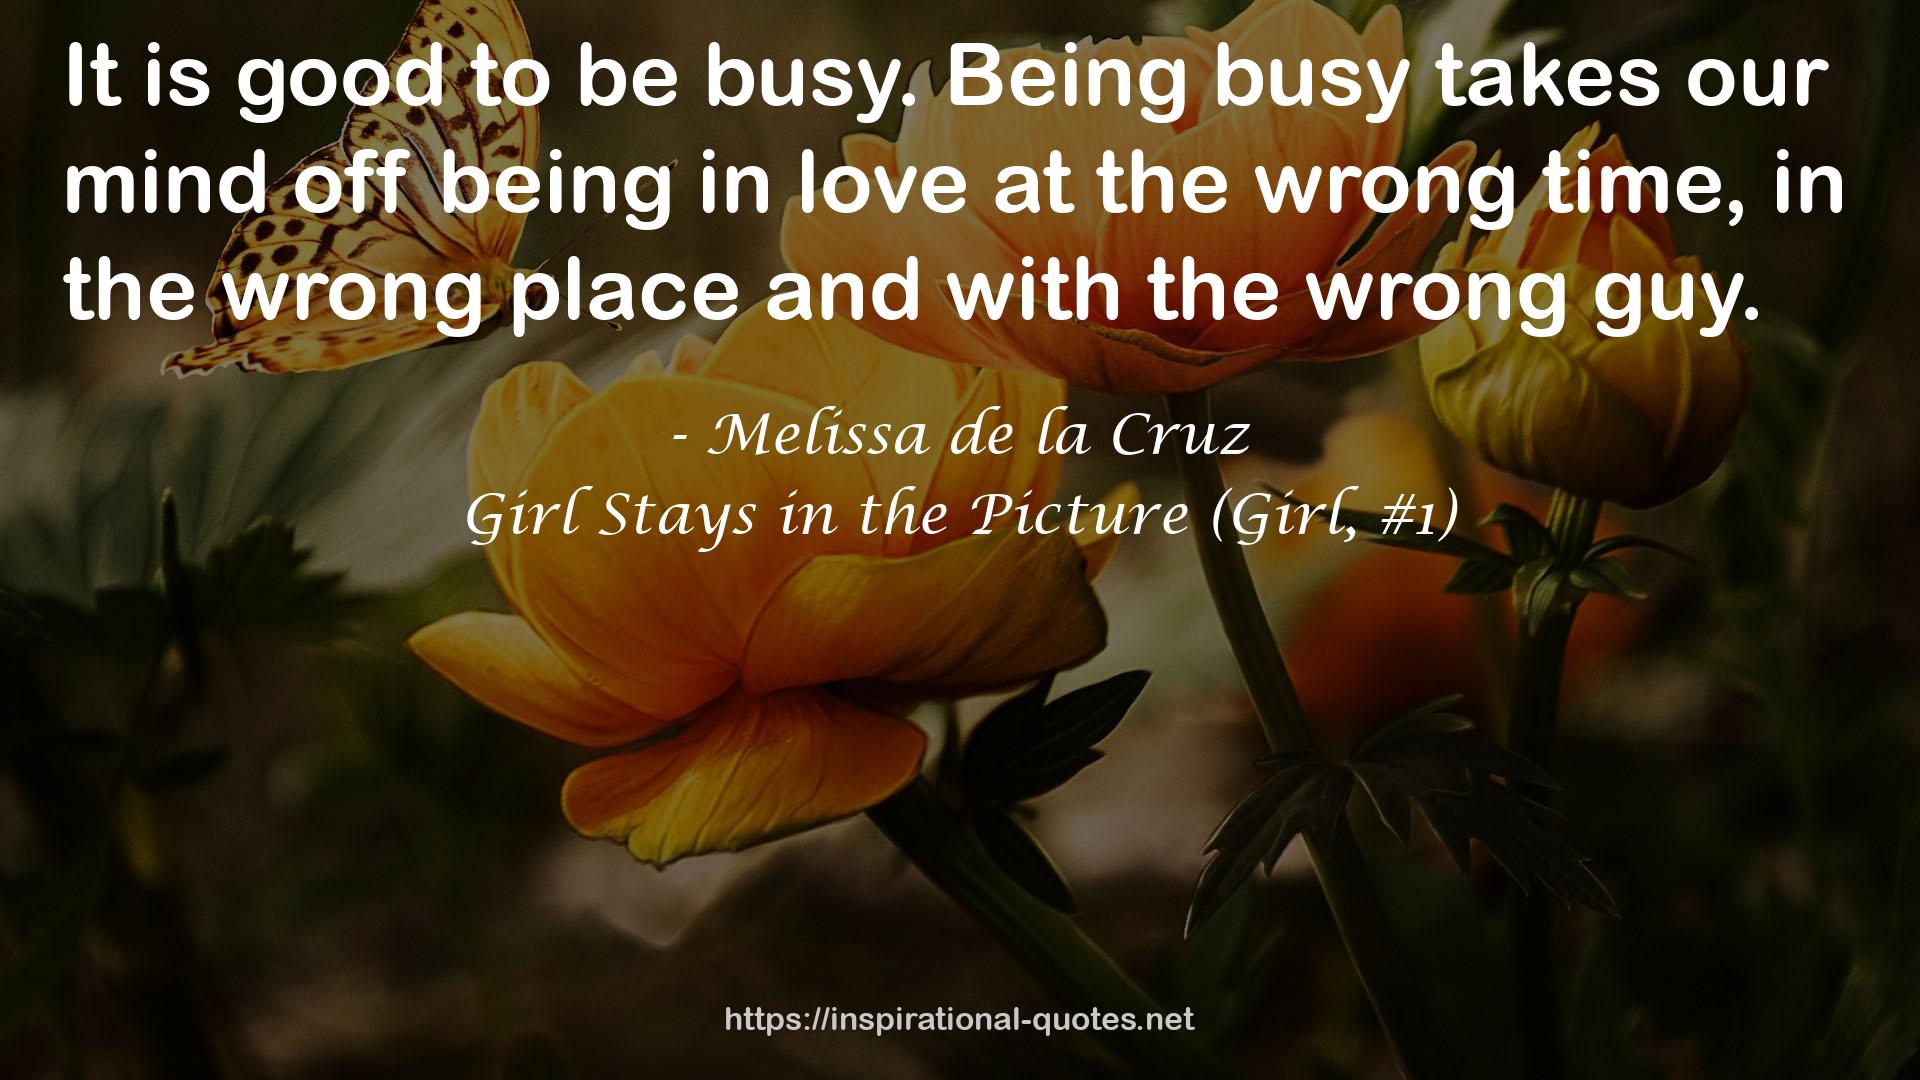 Girl Stays in the Picture (Girl, #1) QUOTES